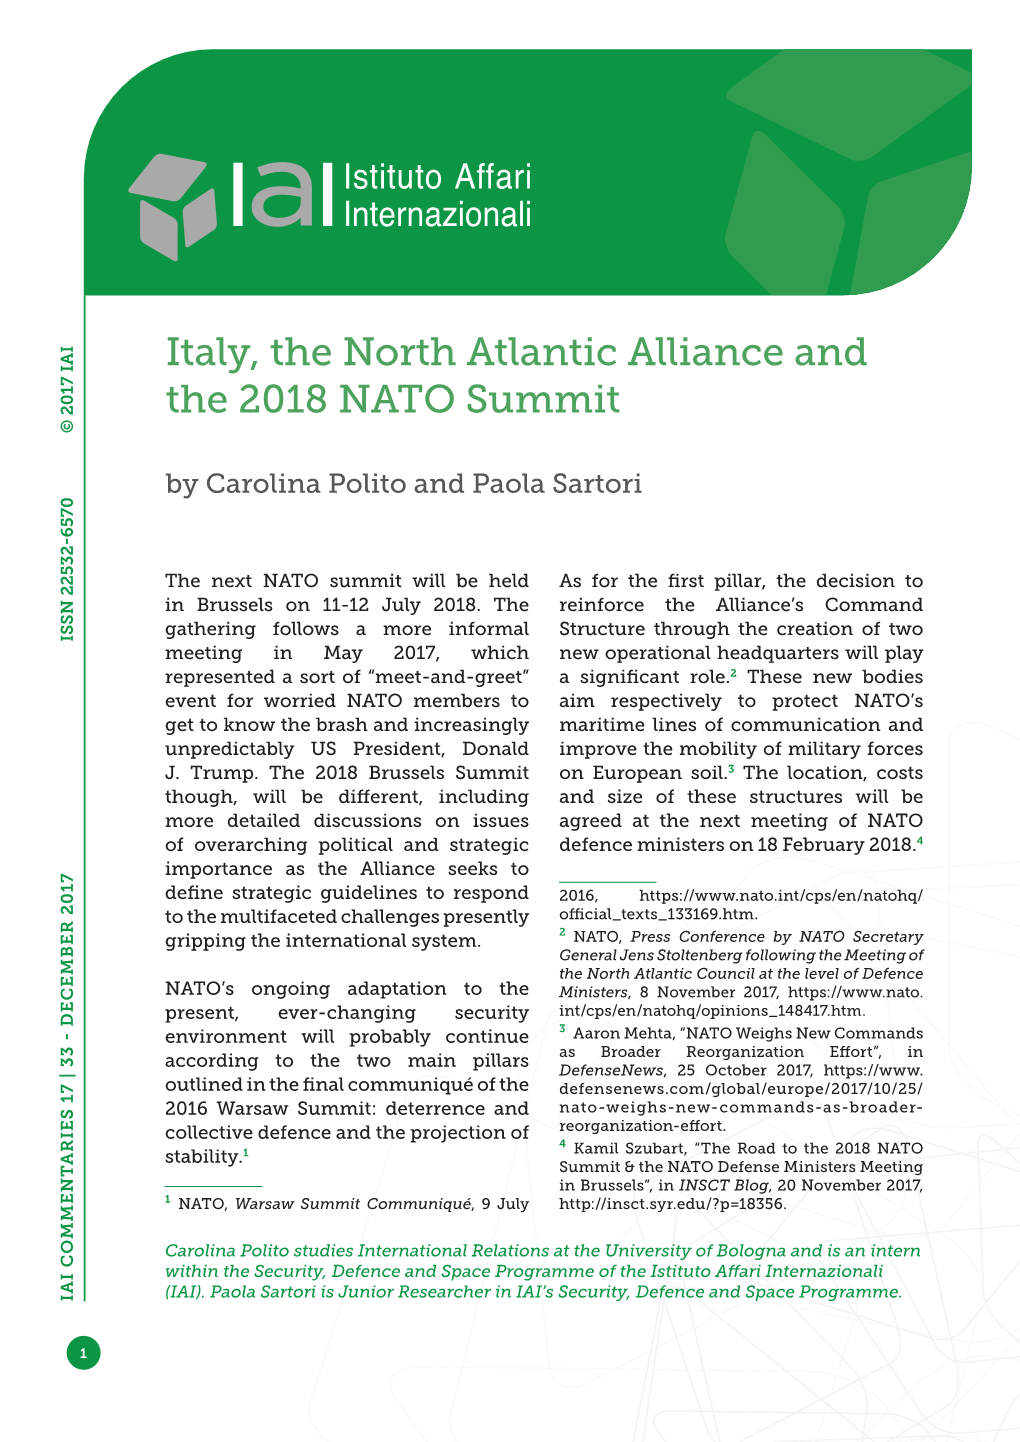 Italy, the North Atlantic Alliance and the 2018 NATO Summit